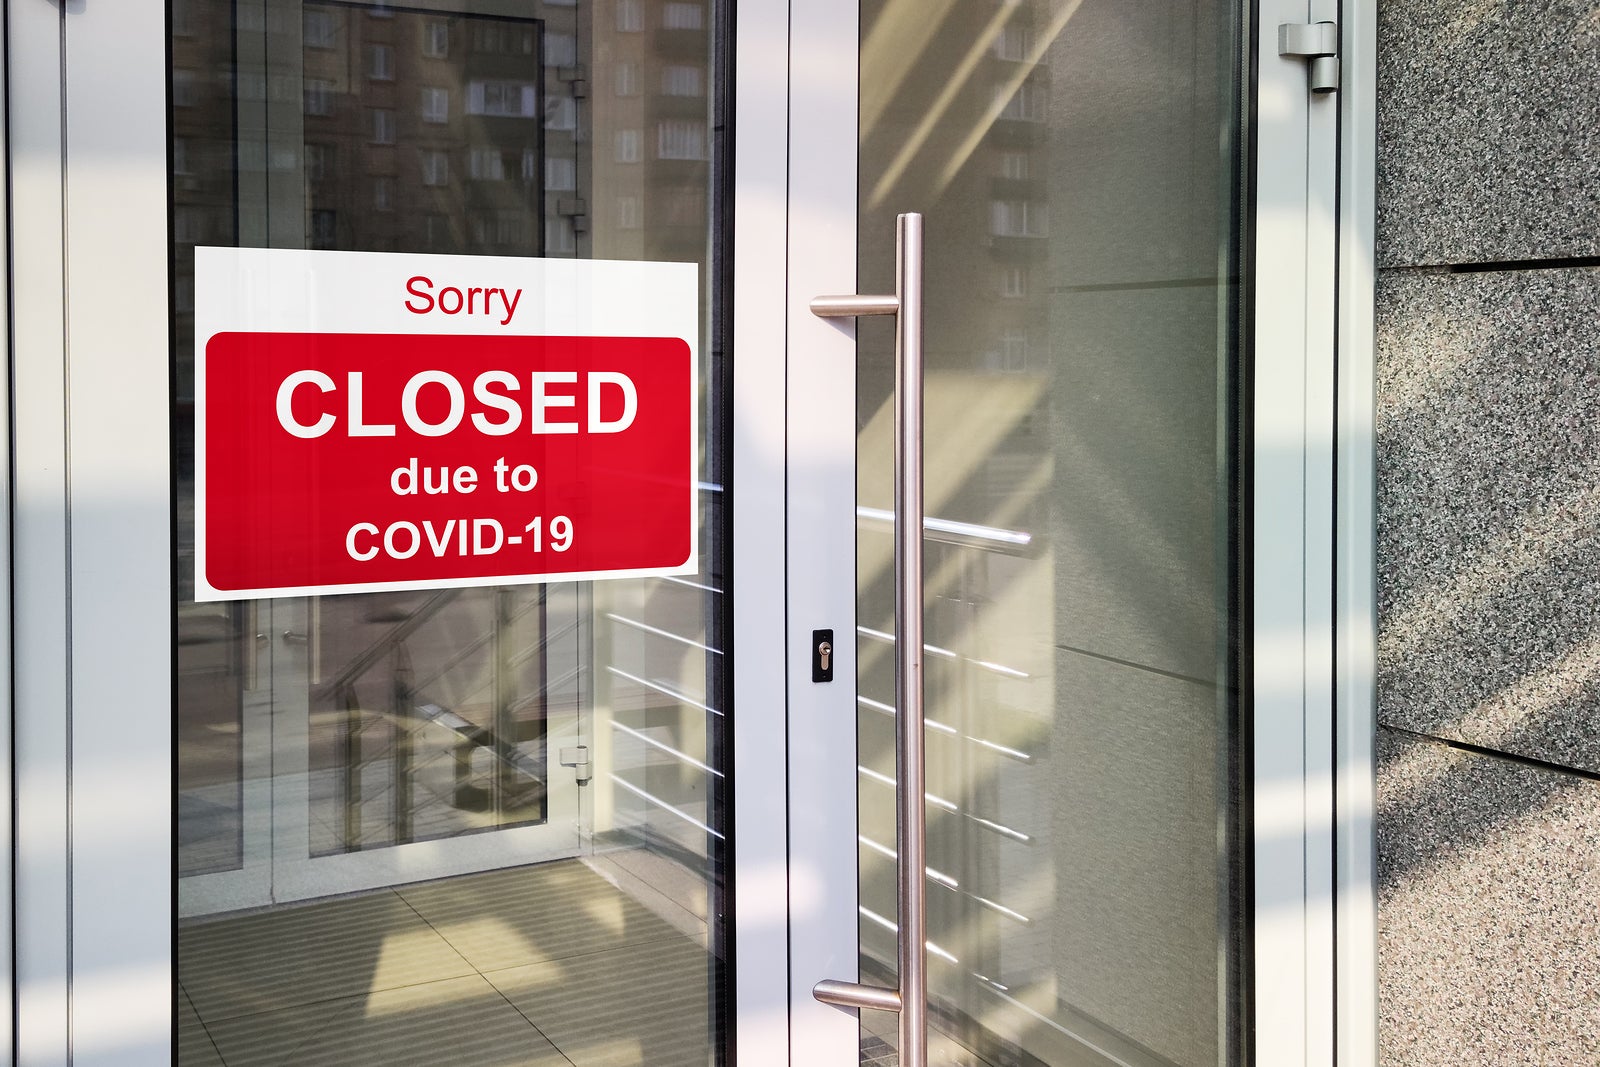 Do I Still Need Insurance If My Business is Closed?